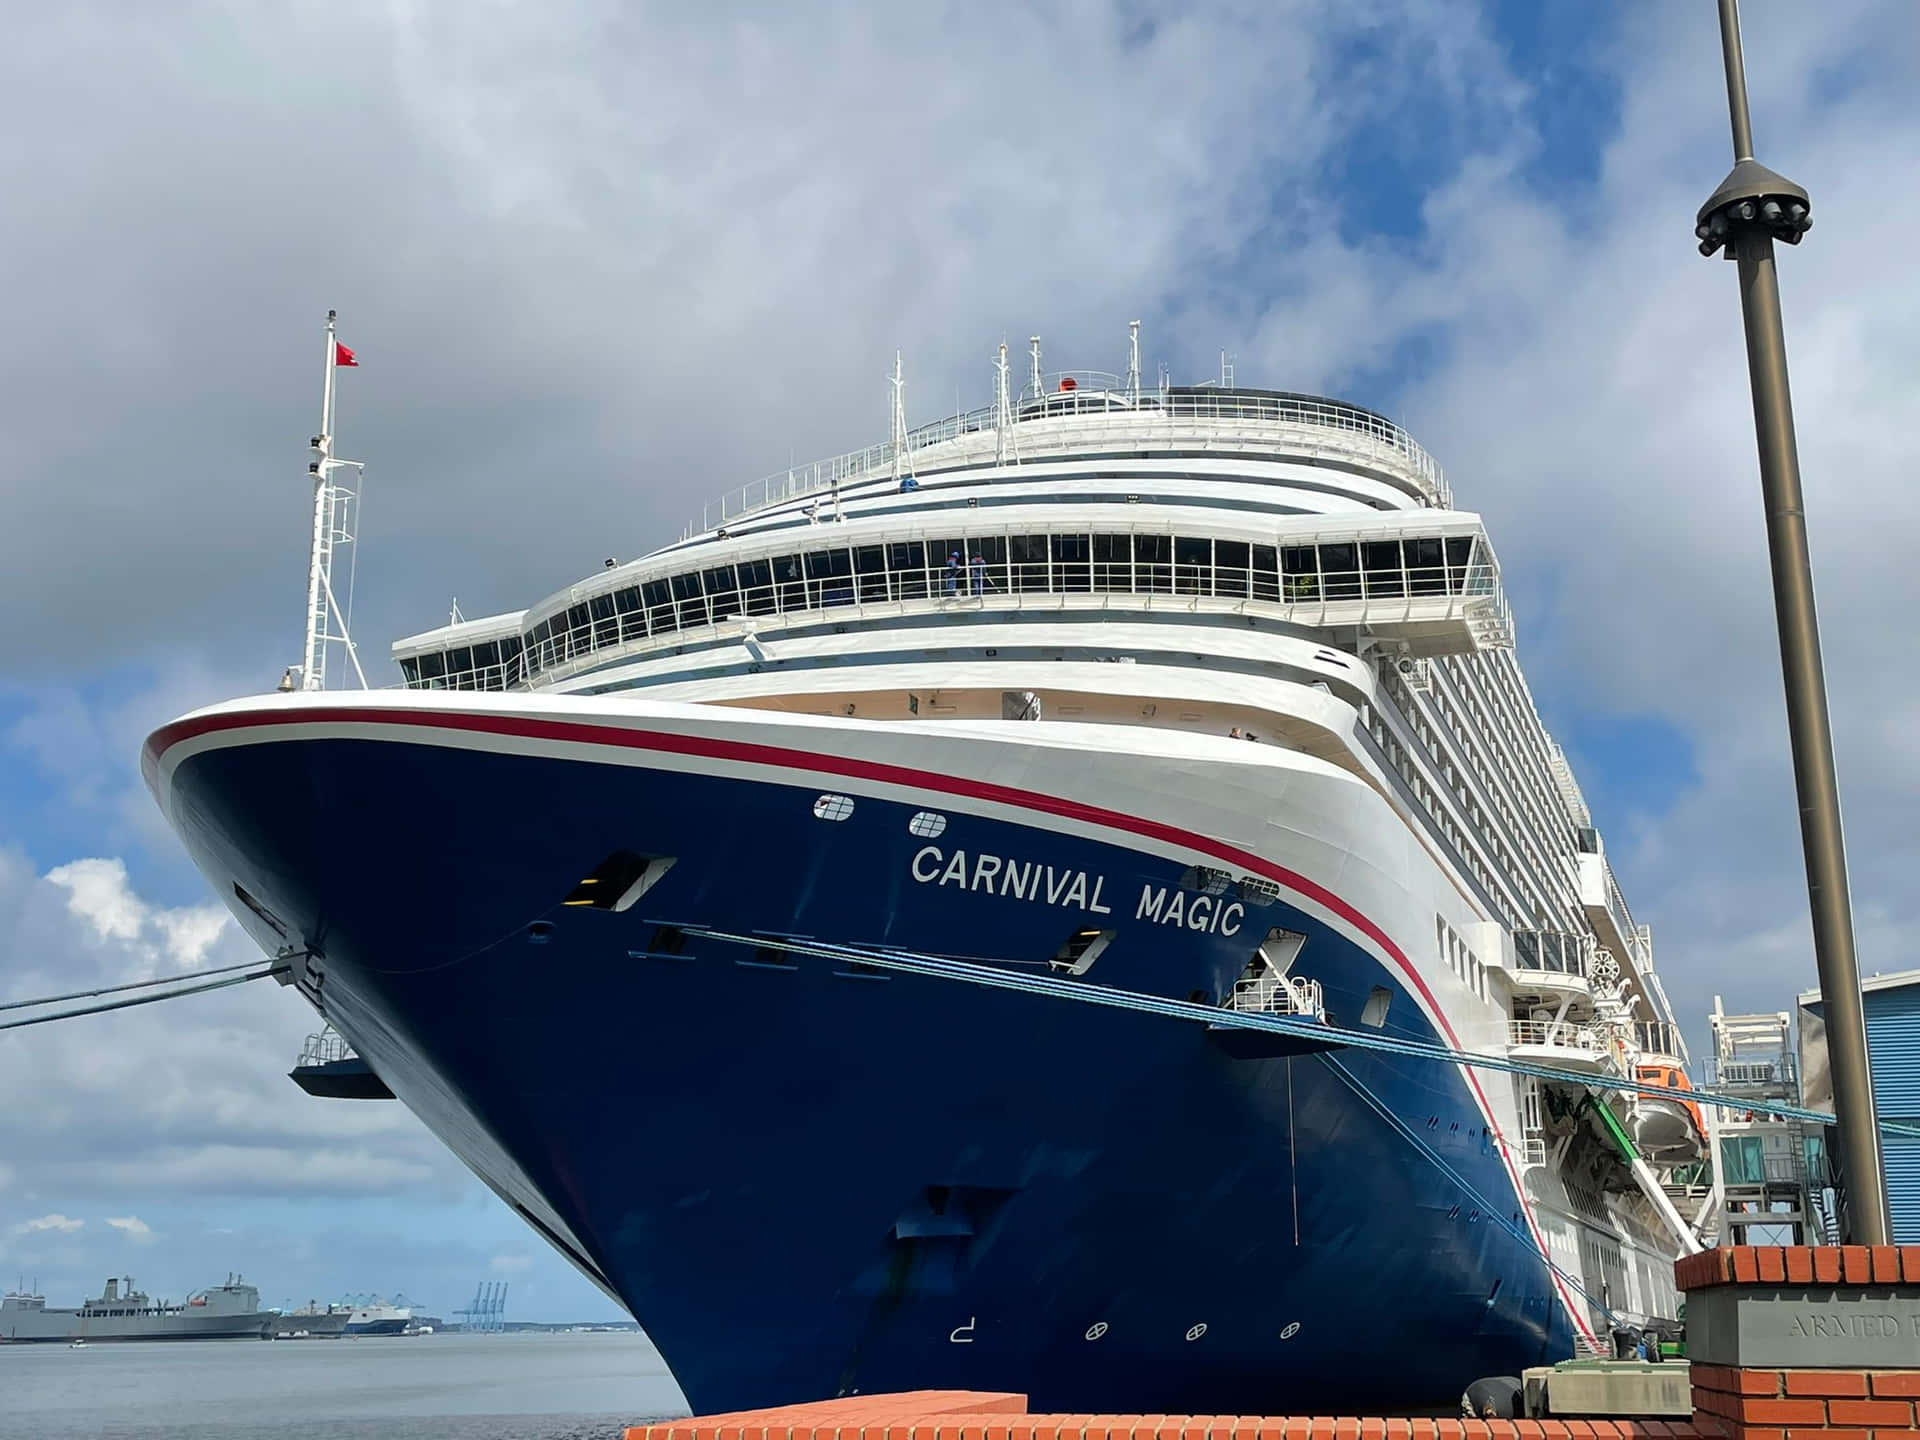 Take a Magical Journey with Carnival Magic